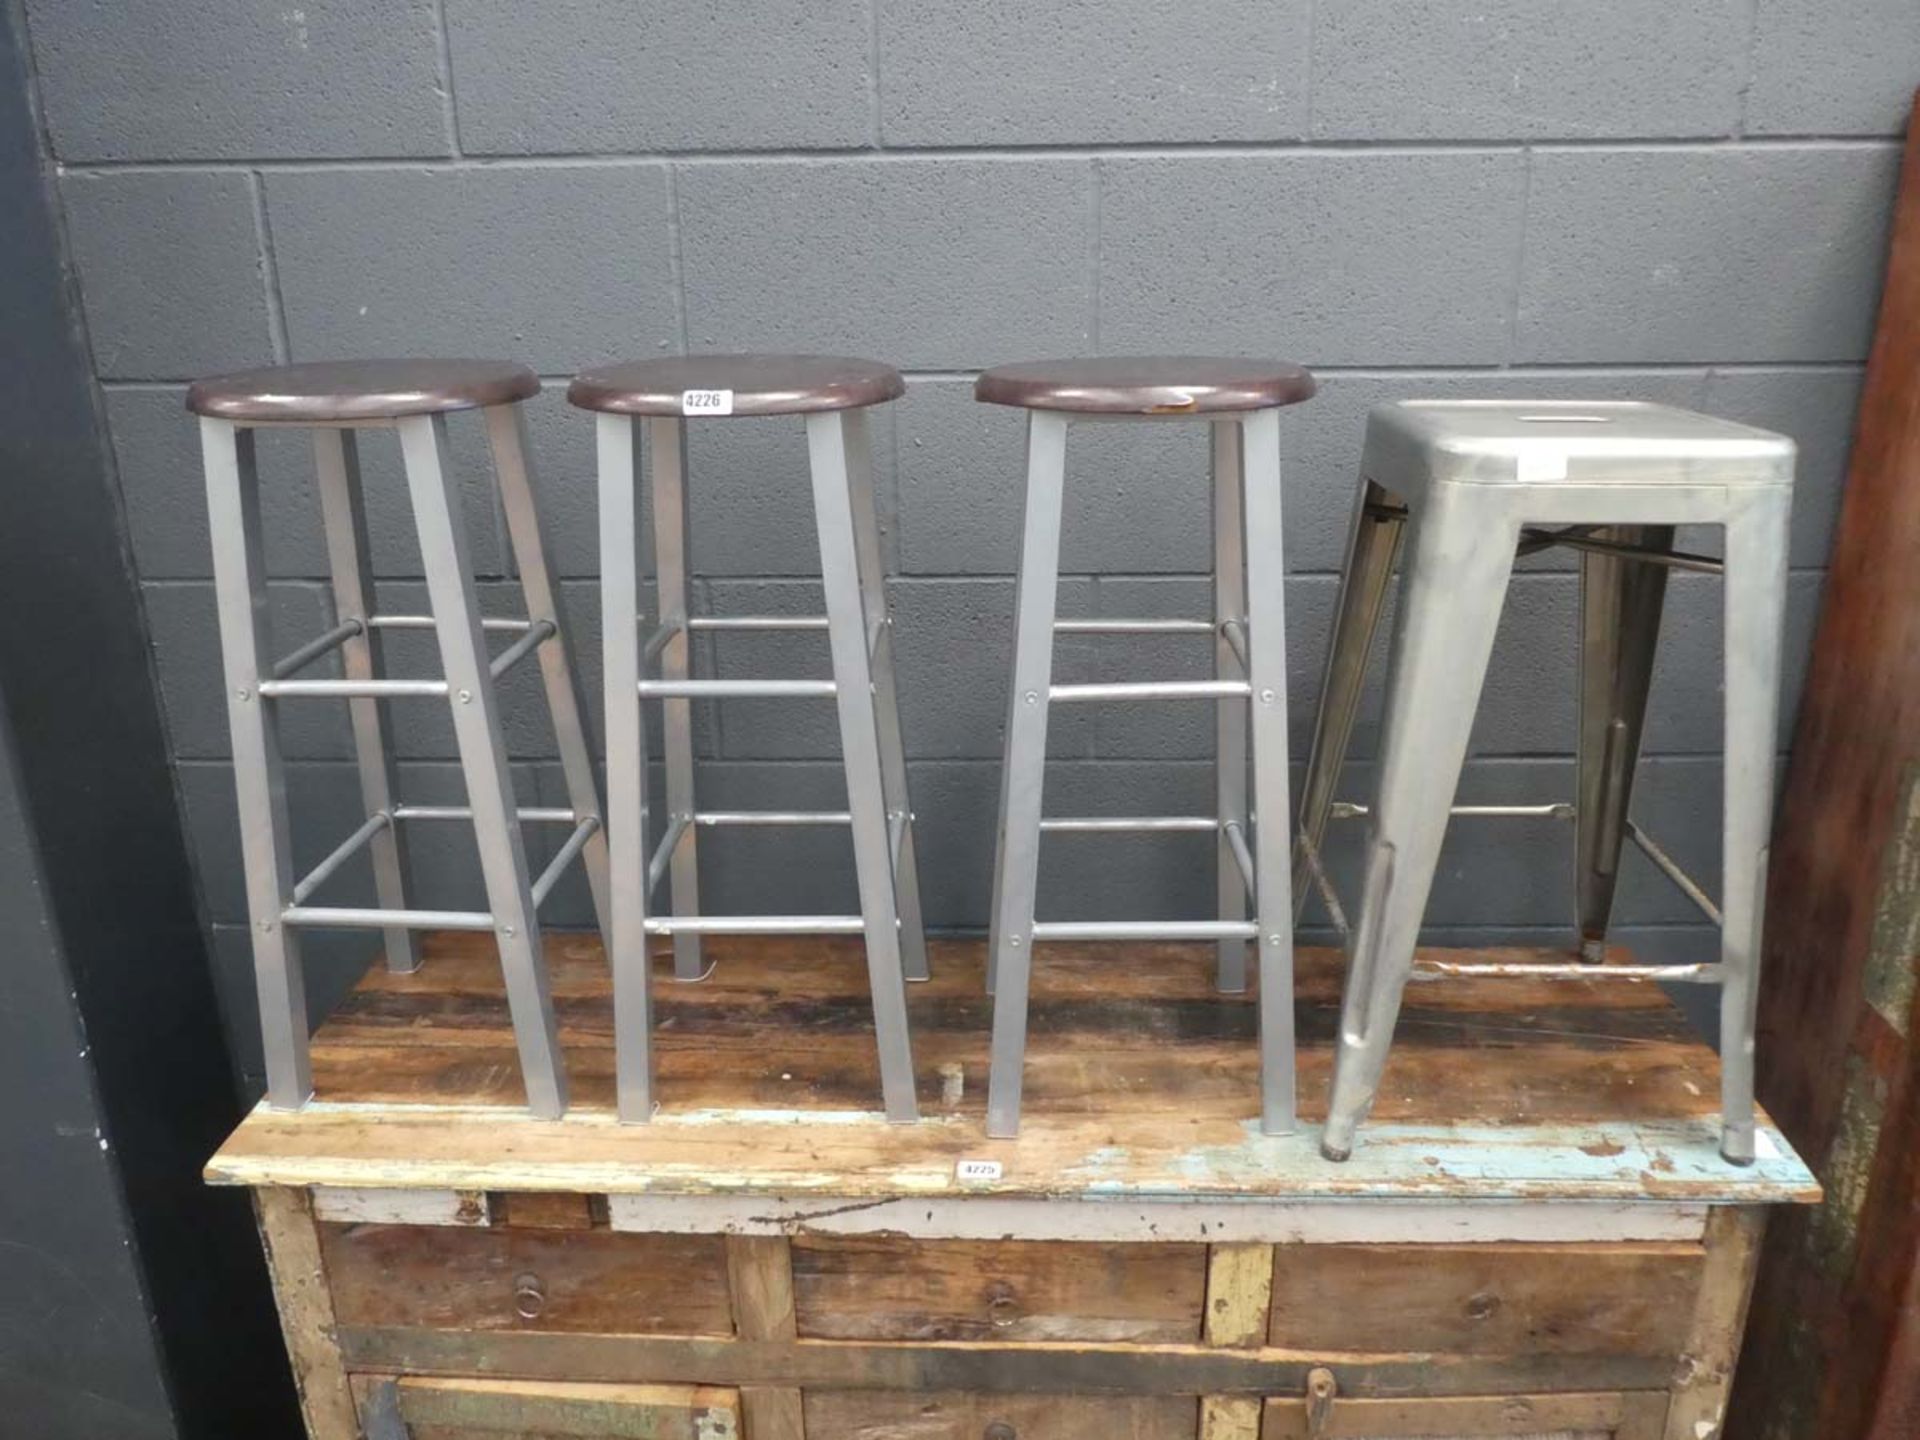 3 wooden topped bar stools with metal frames and one metal stool